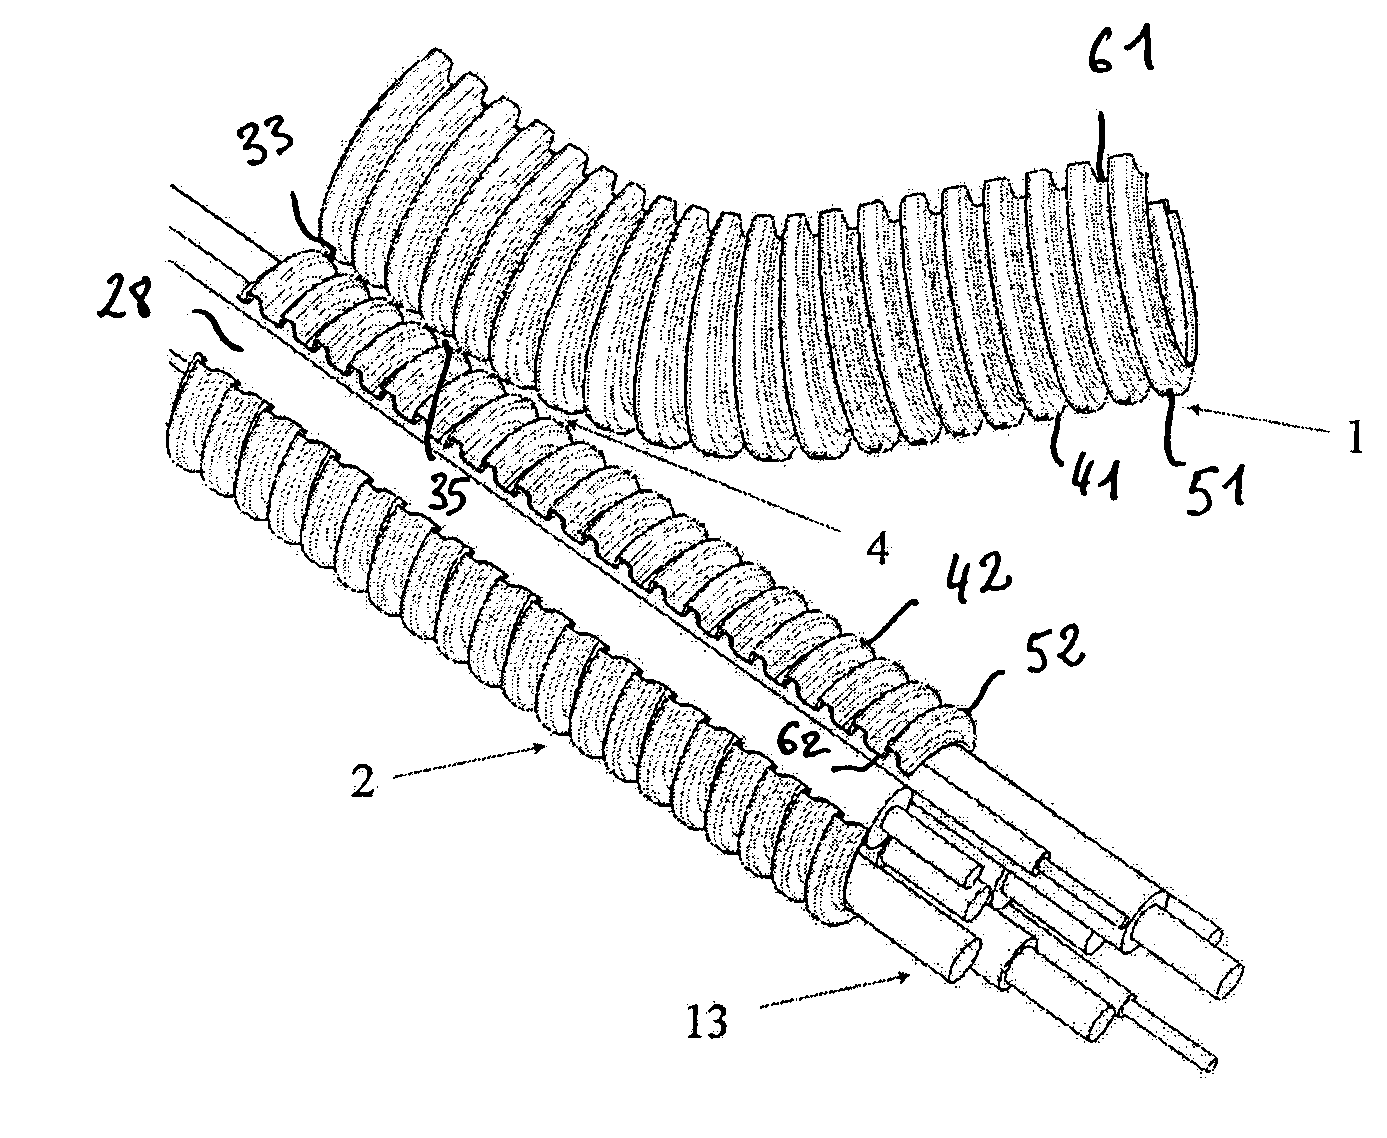 Method and Device for Manufacturing an Assembly of Two Ringed Sheaths That Can Be Detached From One Another to Make a Single Ringed Sheath